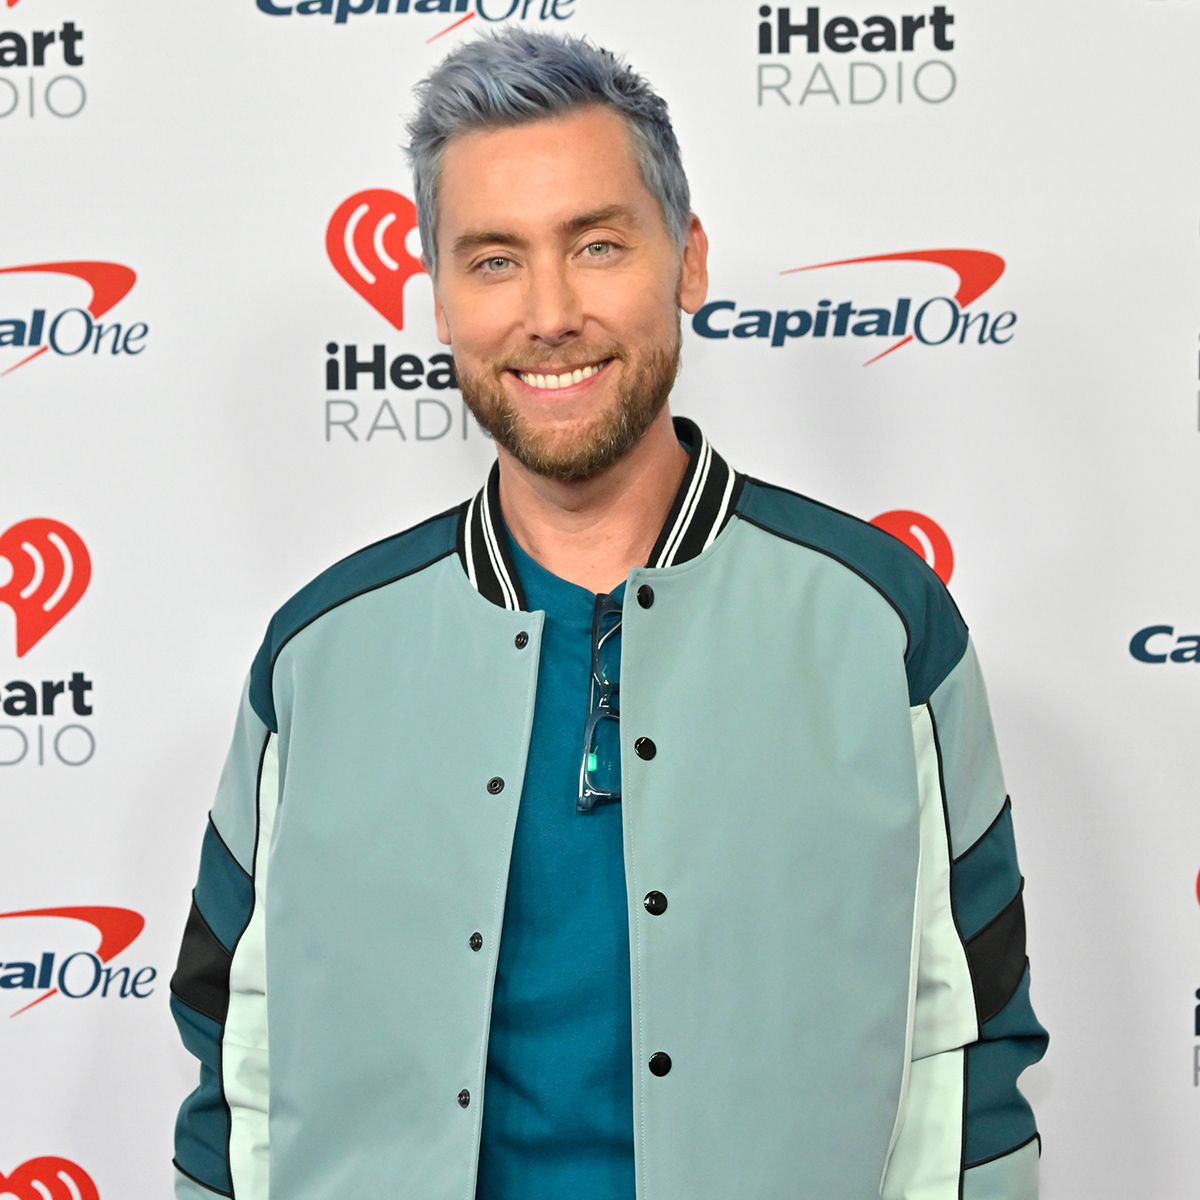 NSYNC won't tour - but Justin Timberlake is heading out on the road